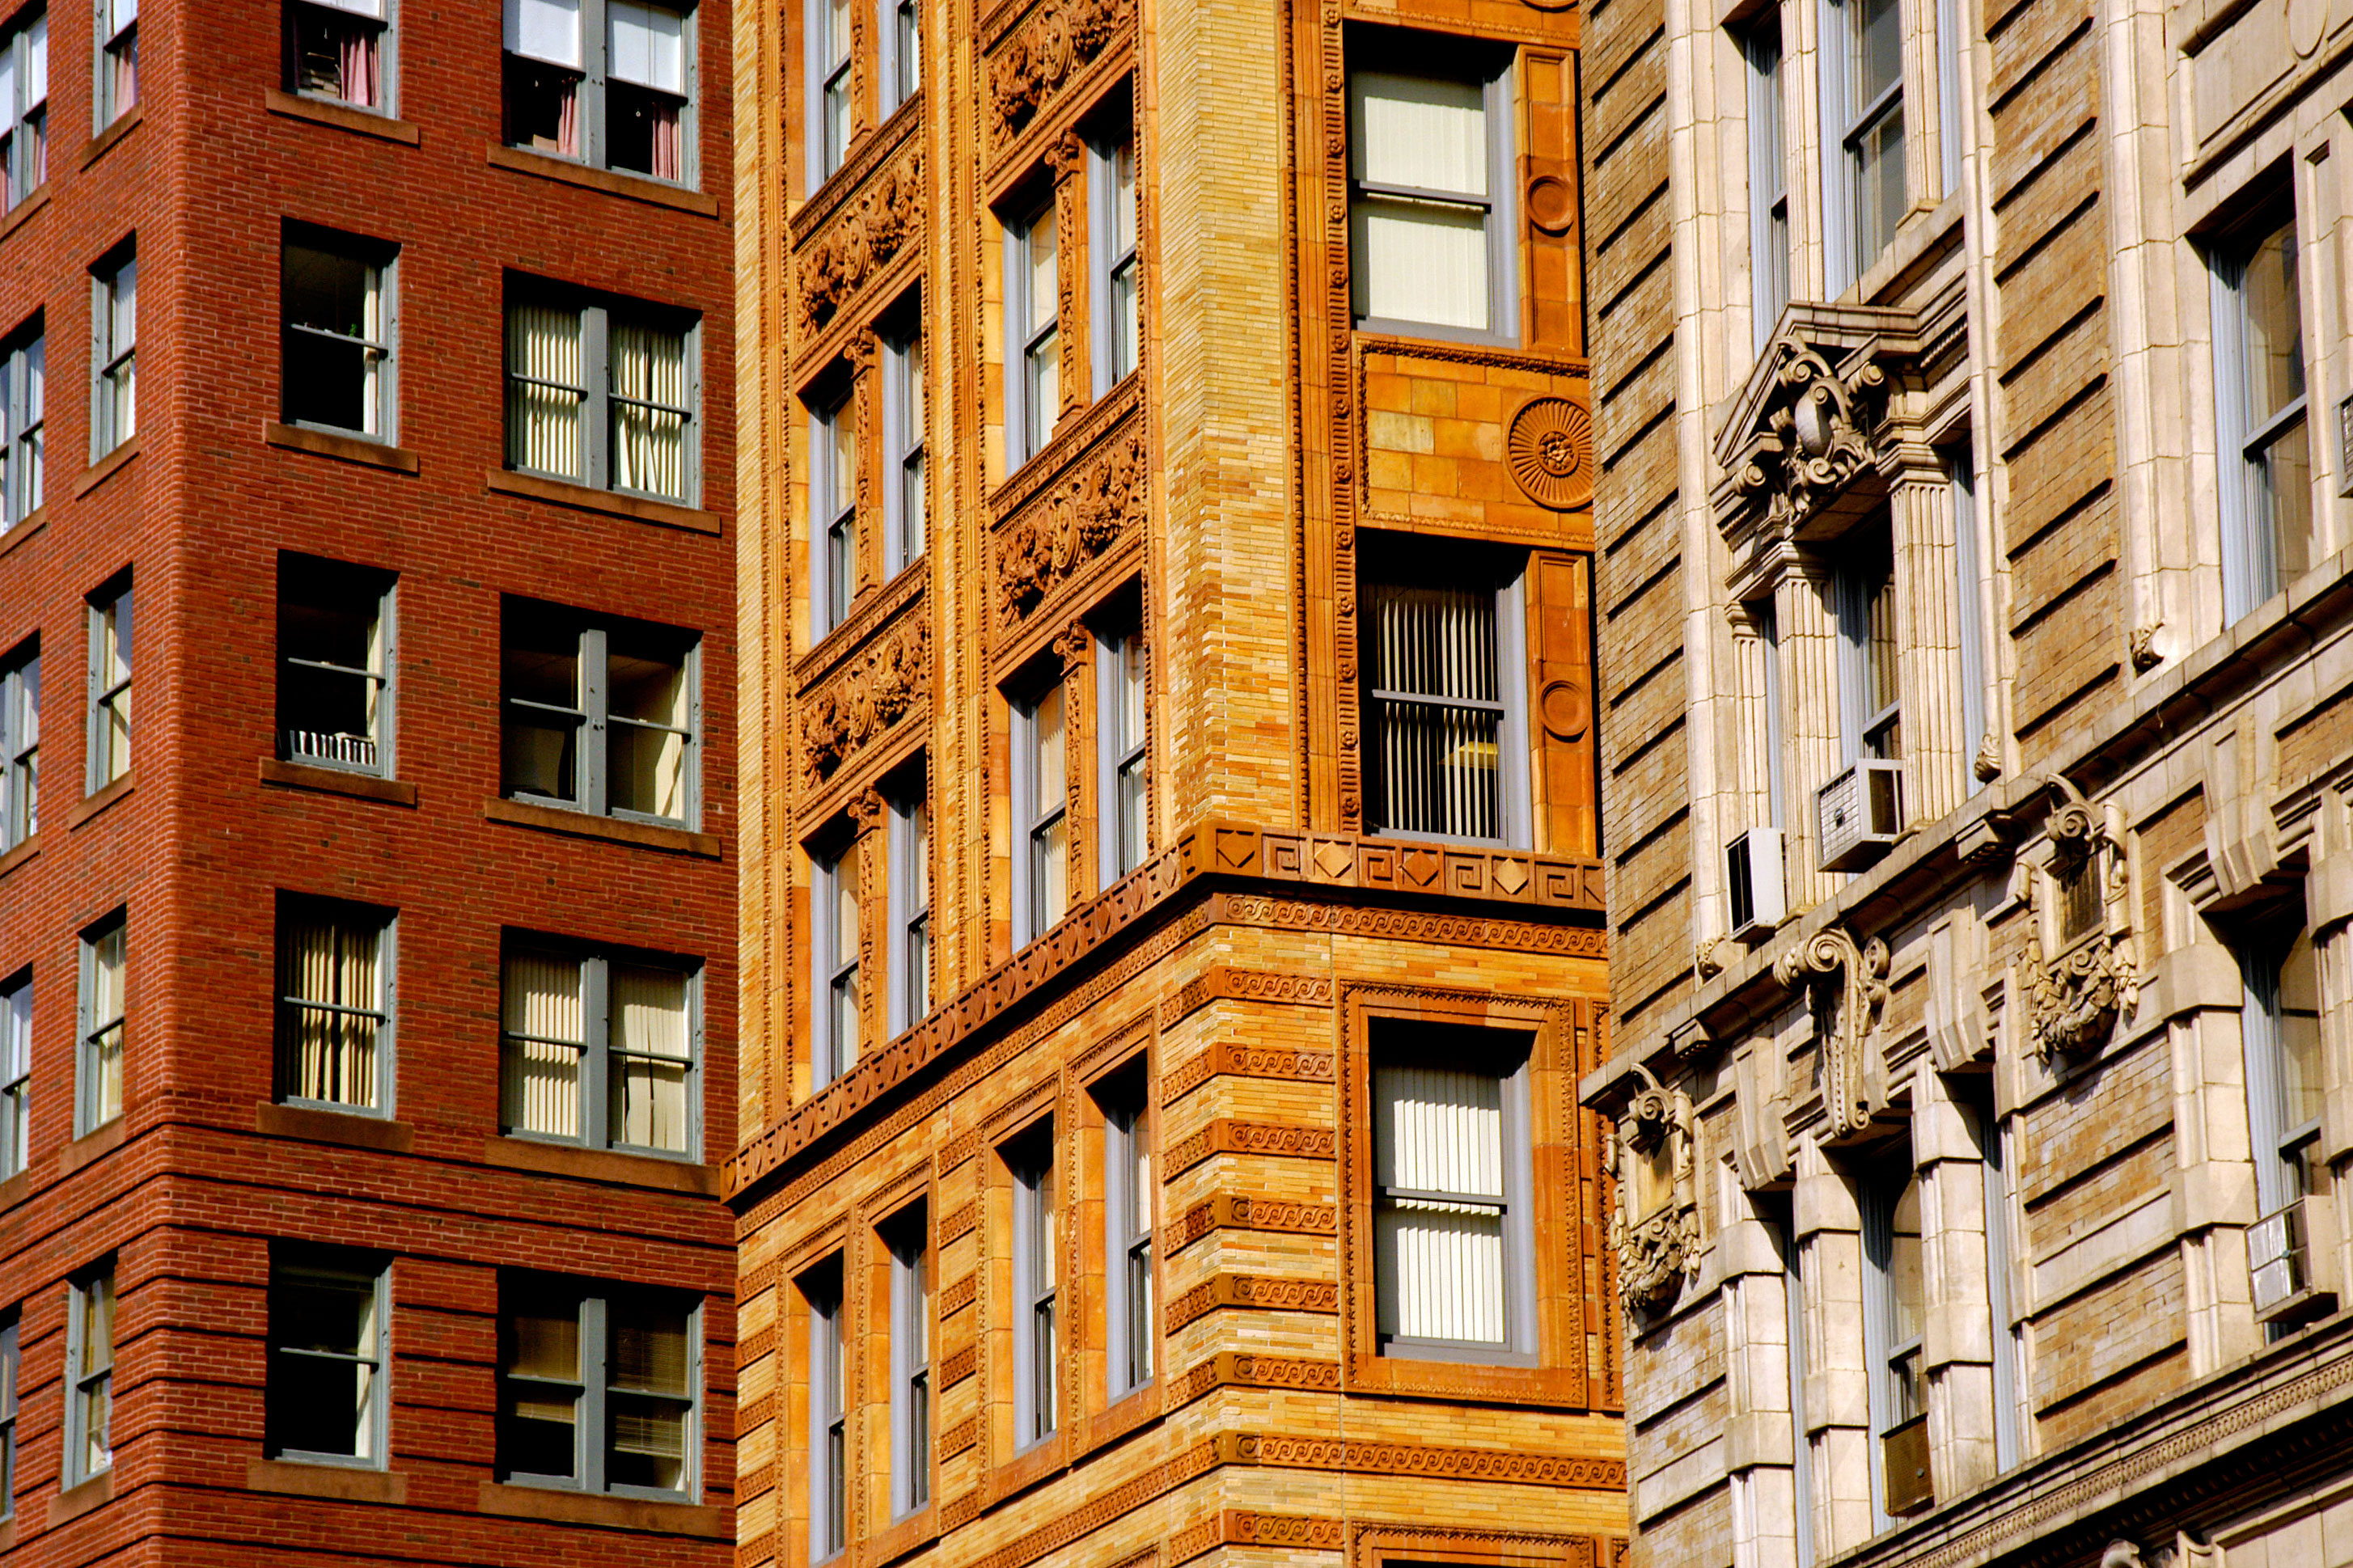 The exteriors of three apartment buildings in Boston. The center facade has orange brick. The facade on the left is red brick. The facade on the right is tan and white.